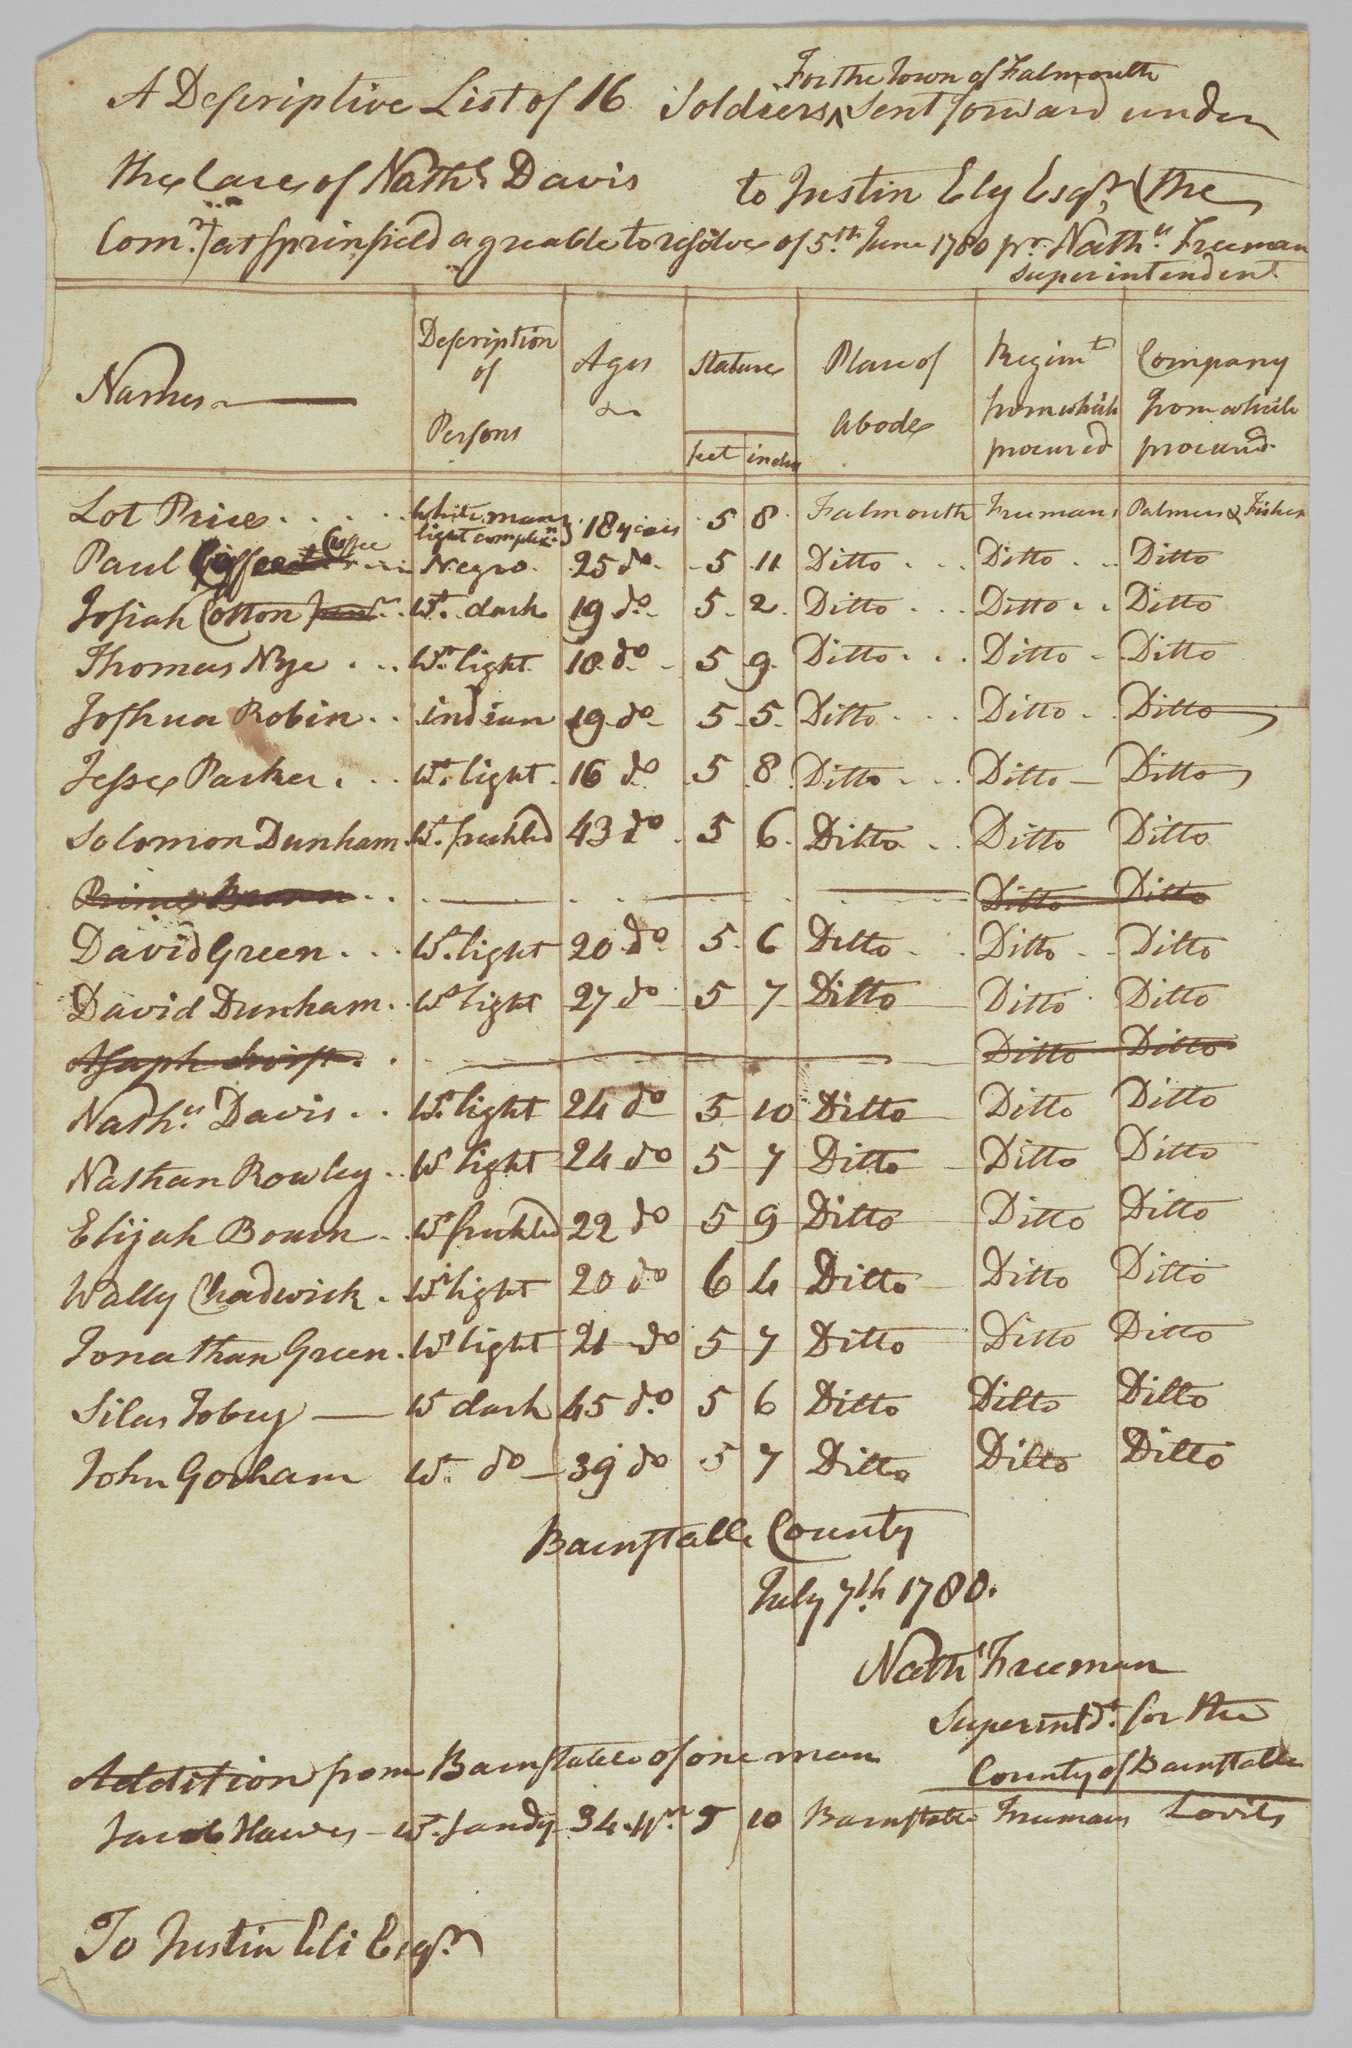 Image of muster roll document